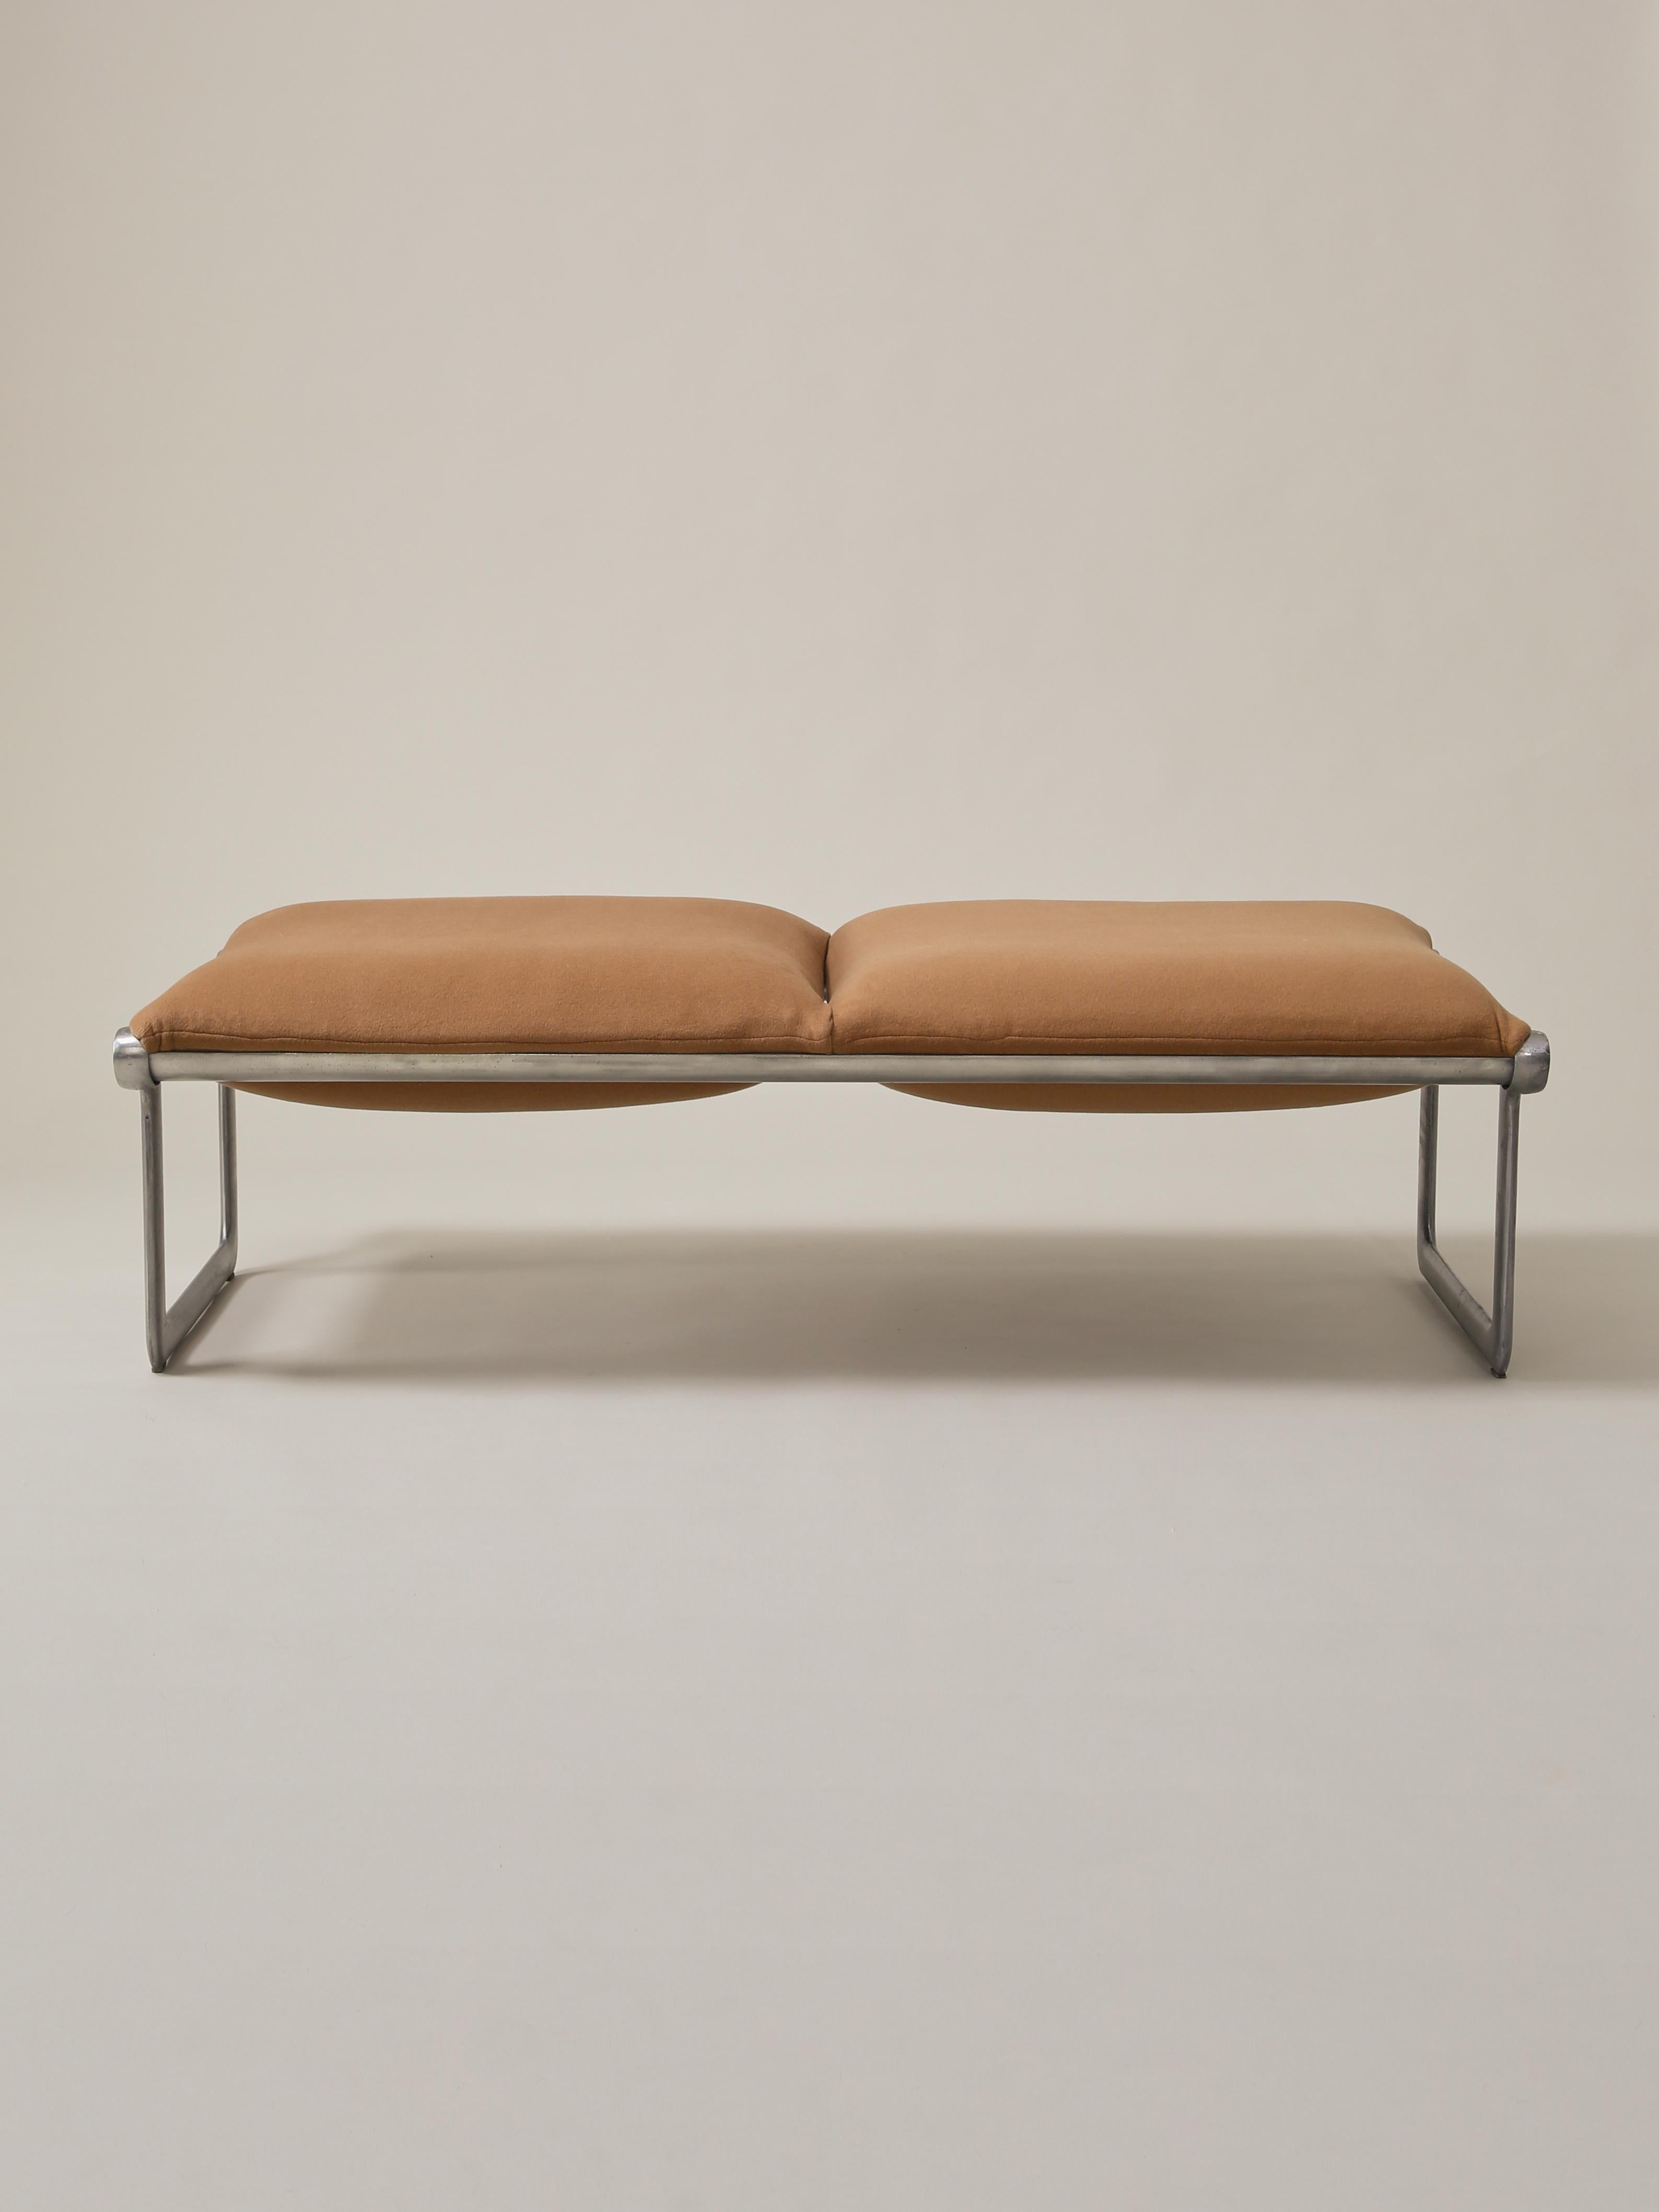 We are thrilled to present a stunning Mid-Century Modern sling bench, an exquisite piece of design history. Created by renowned designers Bruce Hannah and Andrew Morrison for Knoll during the 1970s, this bench reflects the elegance and simplicity of